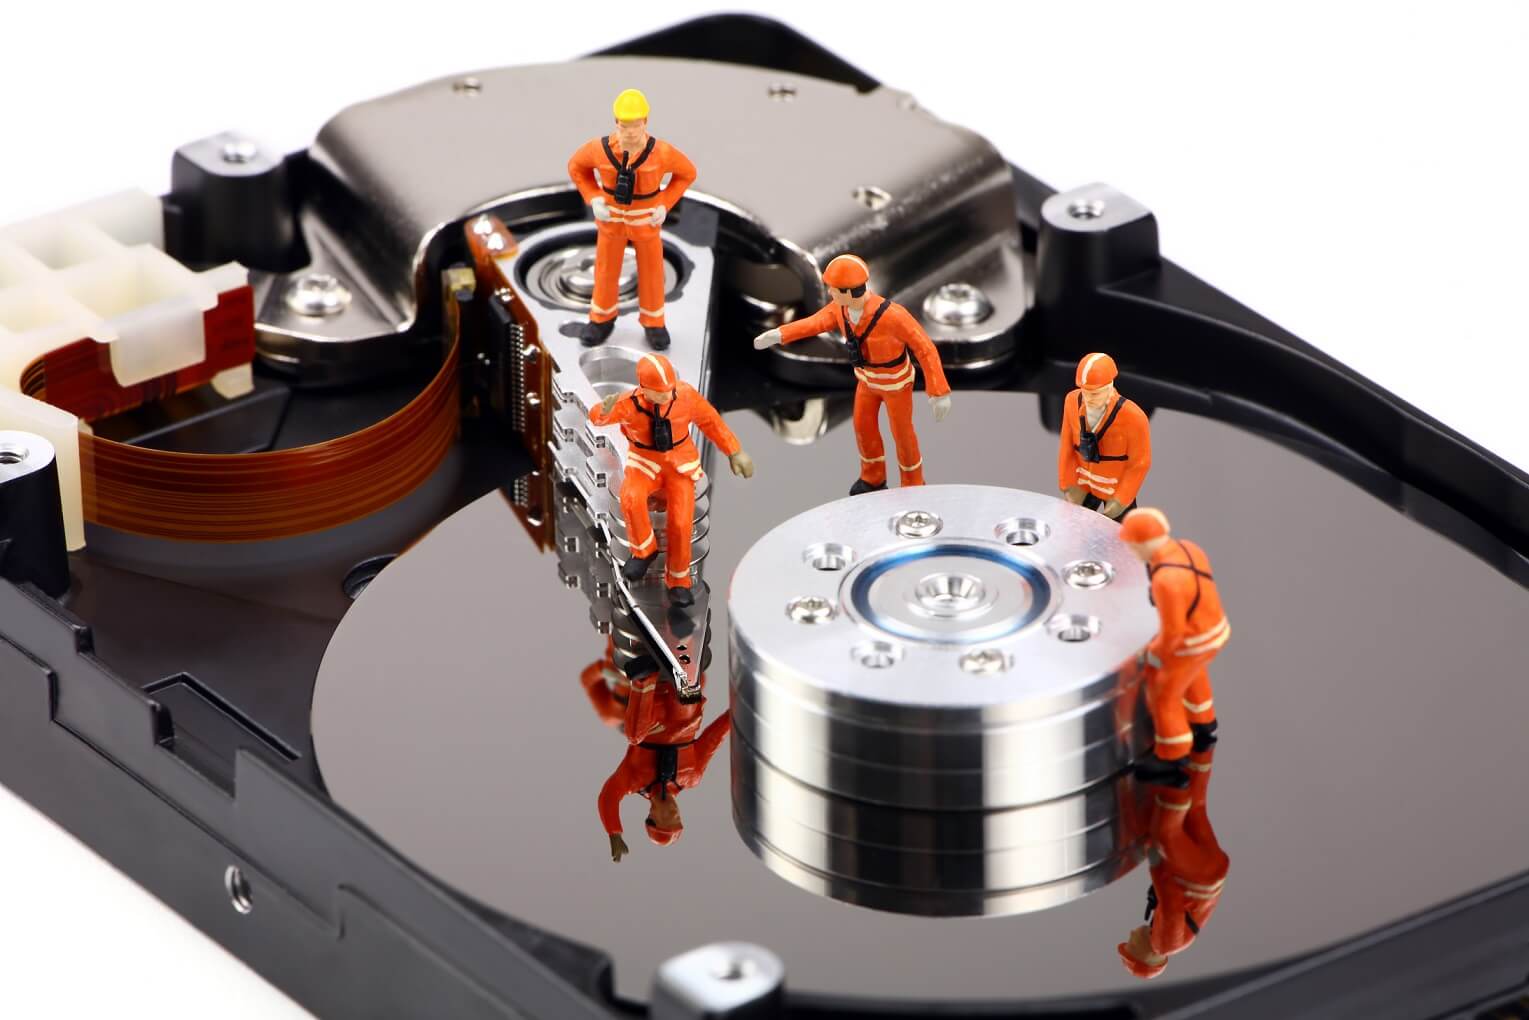 When digital data becomes lost for any reason, data recovery is the action of restoring it